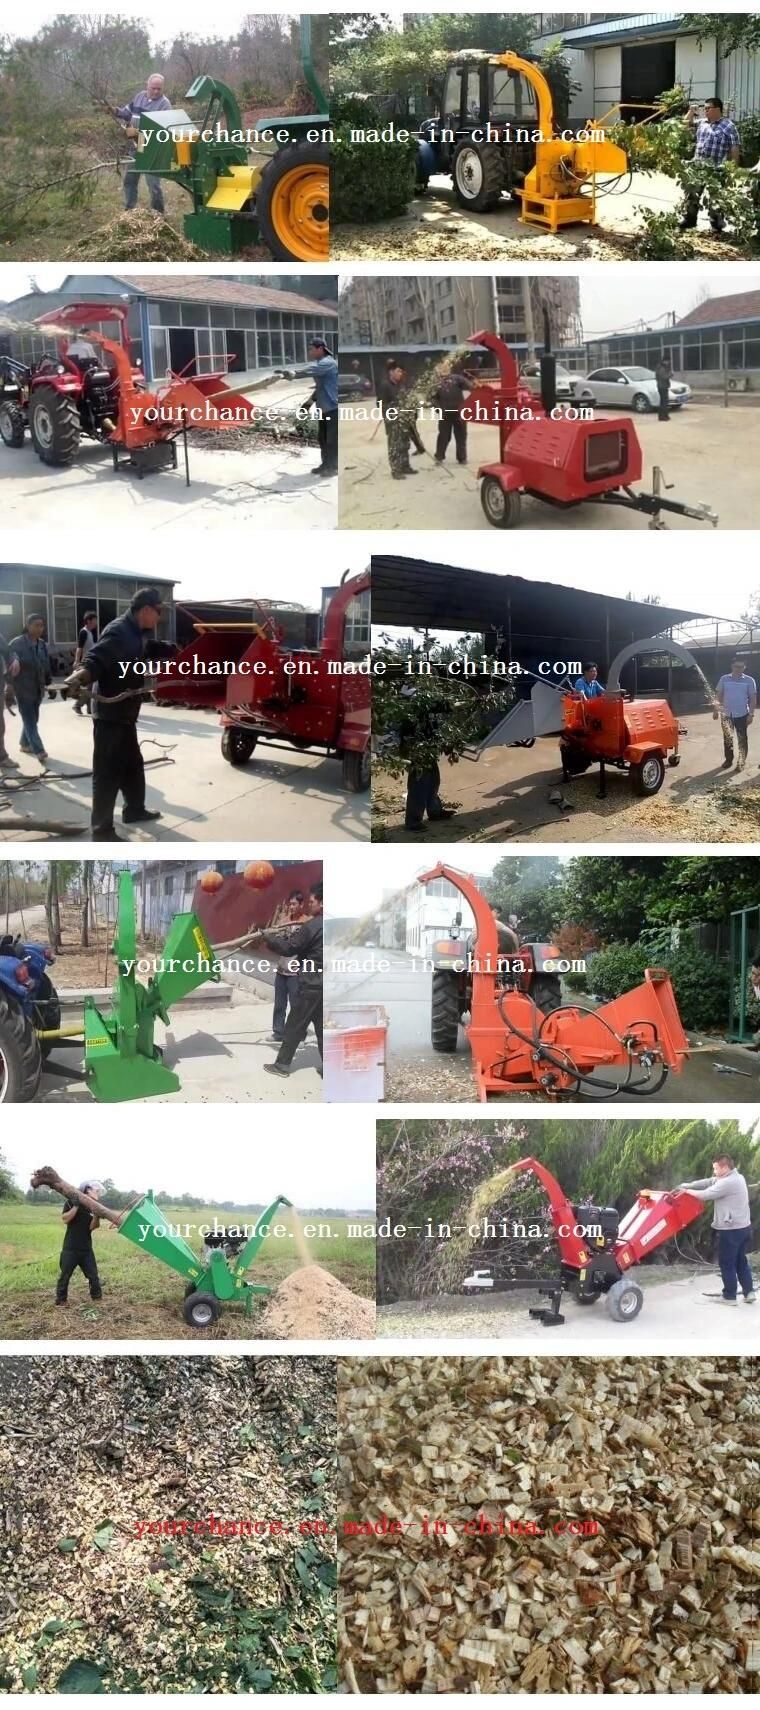 Factory Supply Forestry Machine Wc-18 18HP Selfpower China Cheap Hydraulic Feeding Wood Chipper